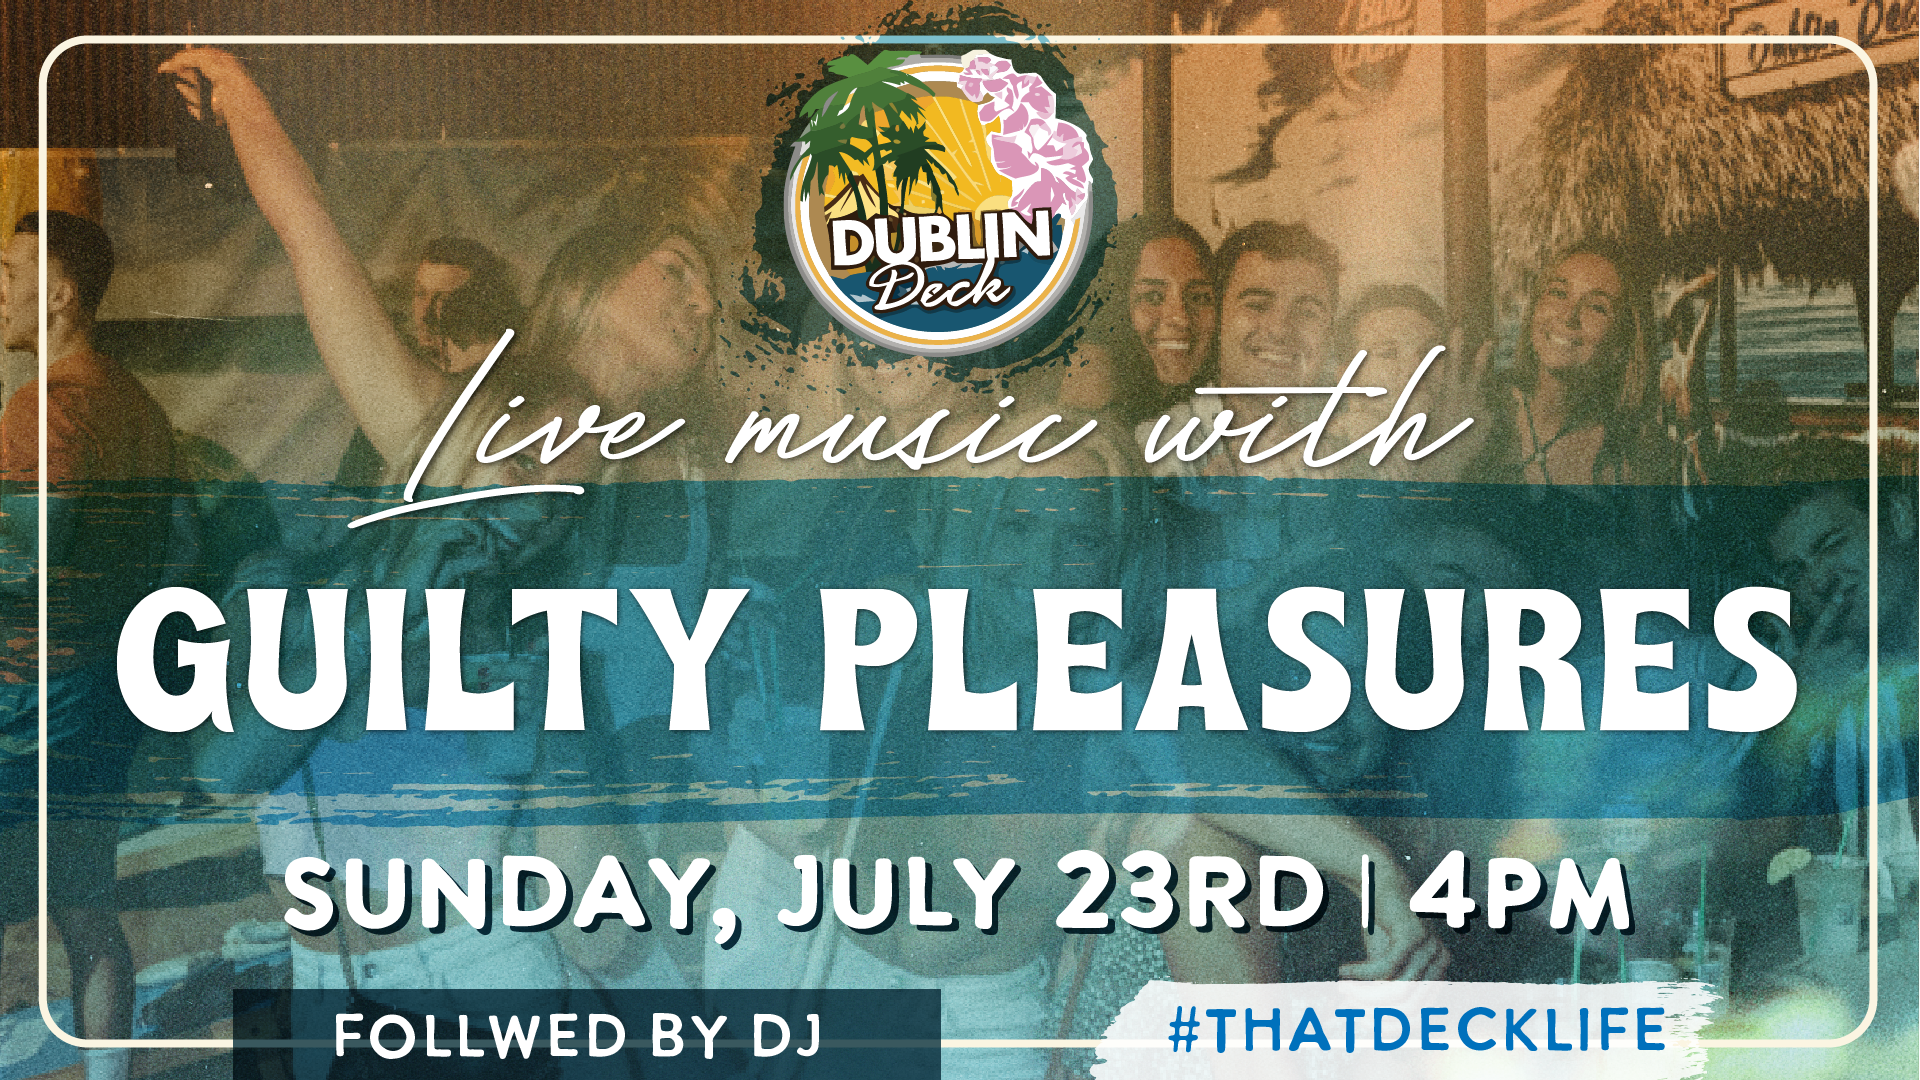 Catch Guilty Pleasures rockin' the Deck! Music starts at 4PM